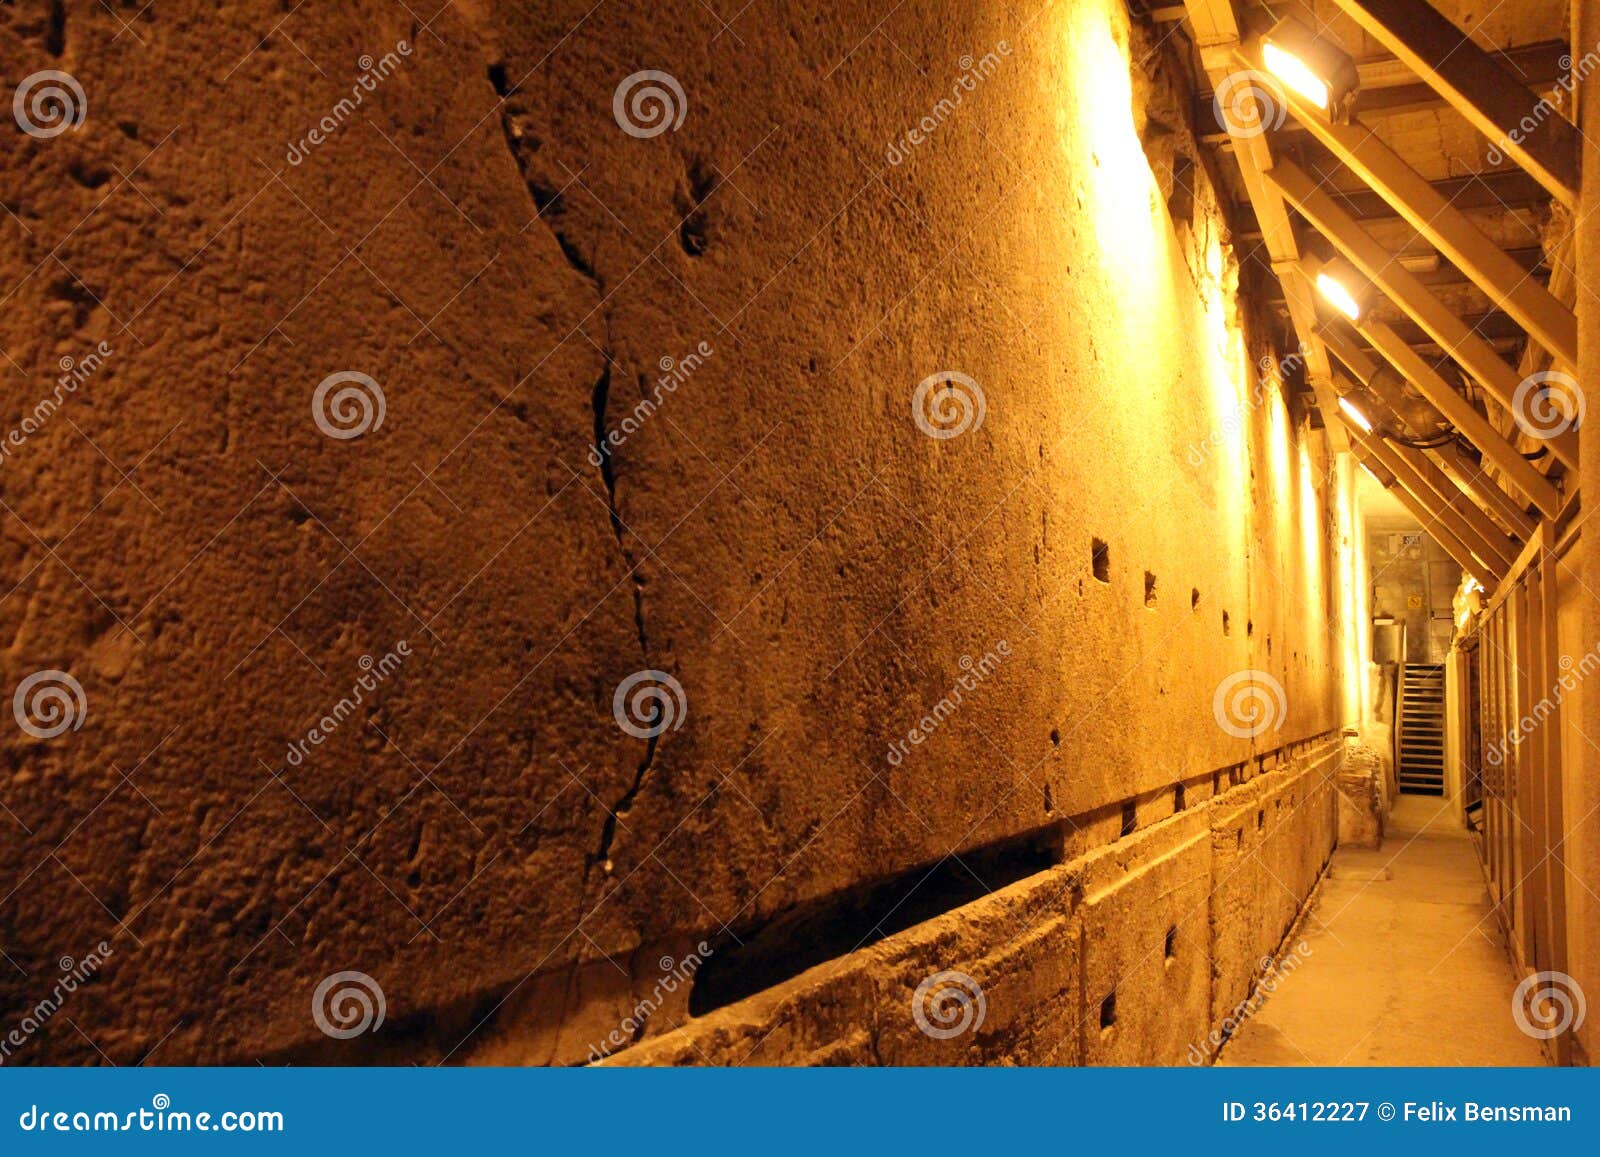 western wall tunnel. 485 metres. the biggest stone - 510 long tons